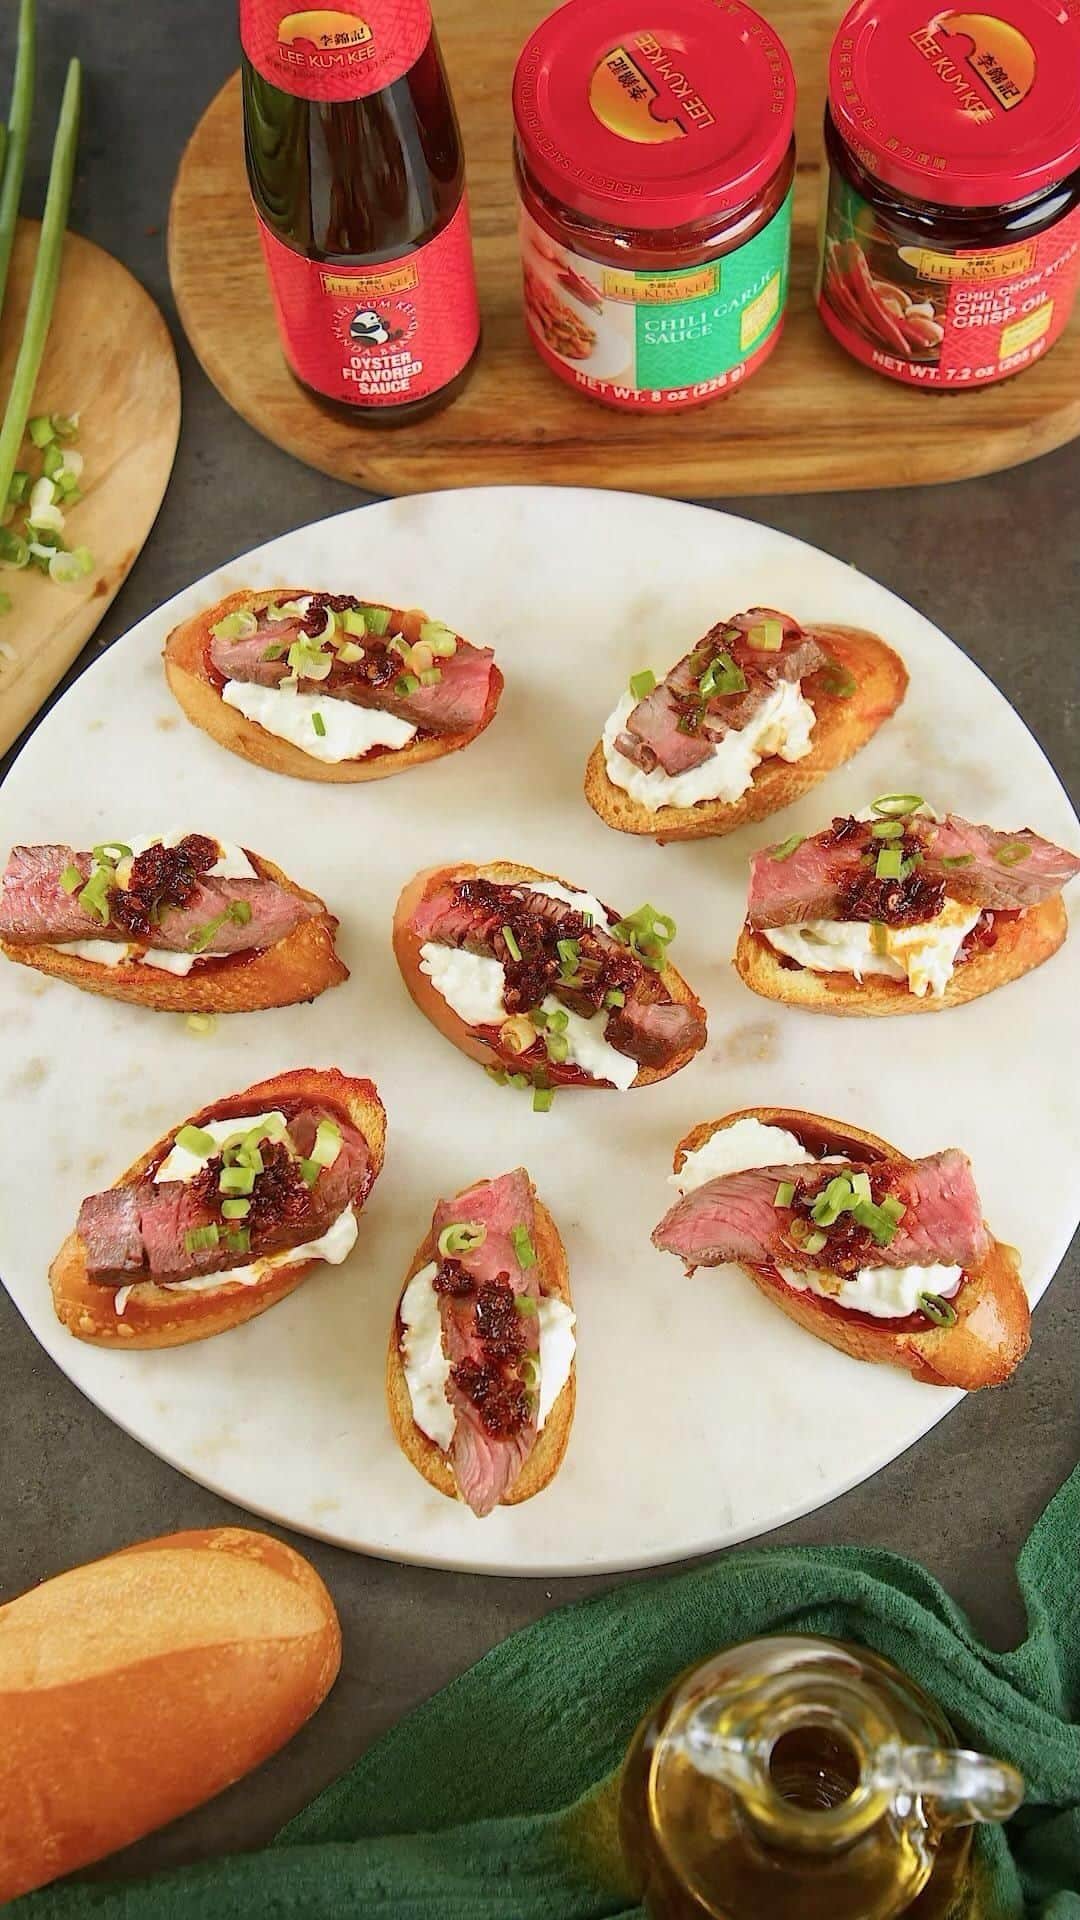 Lee Kum Kee USA（李錦記）のインスタグラム：「Introducing Steak Crostini, where succulent ribeye meets Lee Kum Kee’s finest flavors. From Panda Brand Oyster Flavored Sauce to Chili Garlic Sauce, it’s a savory sensation like no other.  #leekumkee #leekumkeeusa #steakcrostini #oystersauce #chiligarlicsauce #steakrecipe #fallrecipe #chilicrispoil #chilicrisp #chilioil」